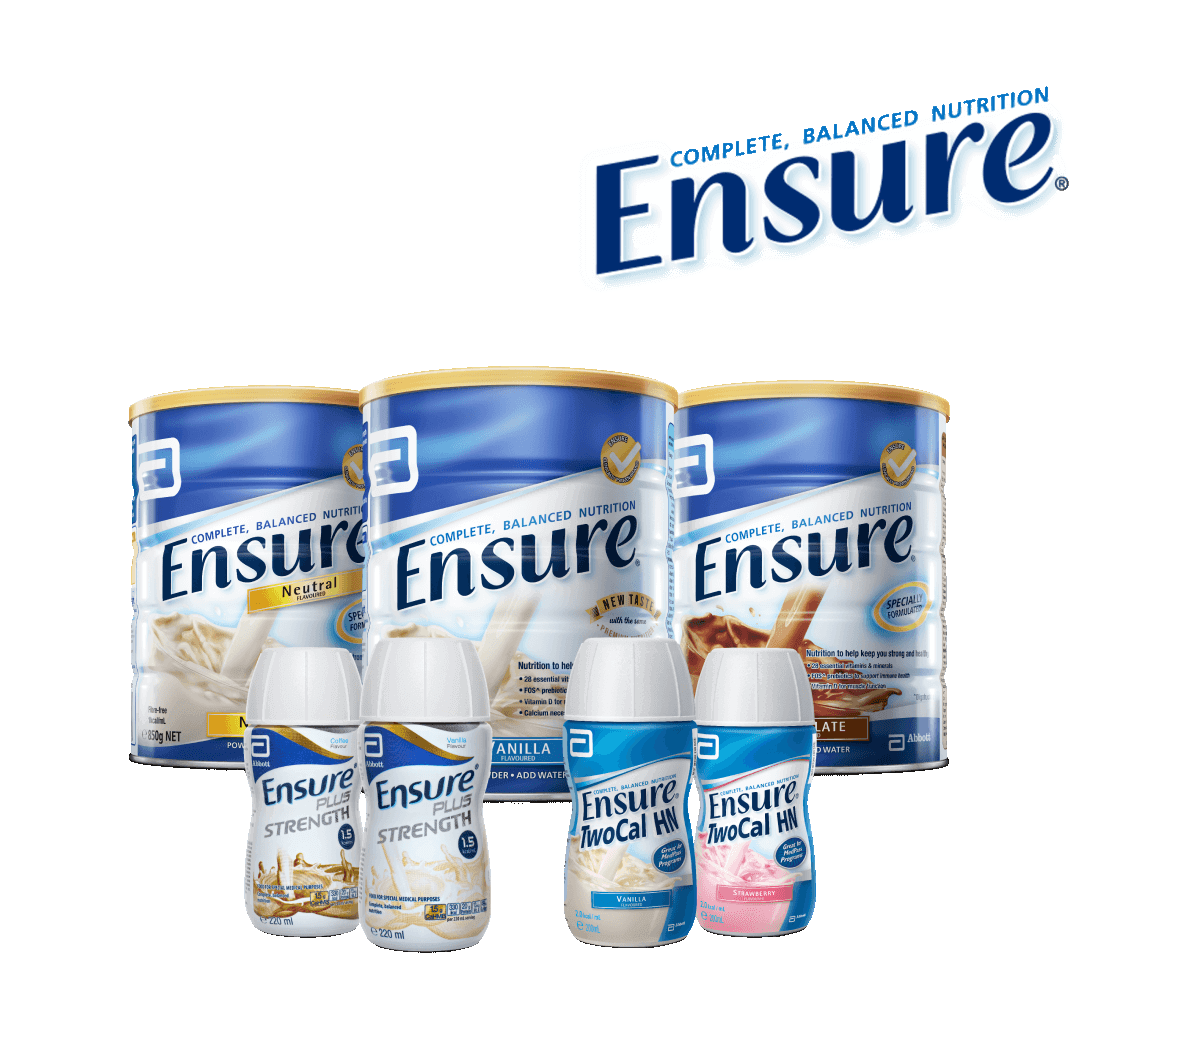 Ensure® - #1 nutritional supplement drink in the world with over 30 clinical studies.